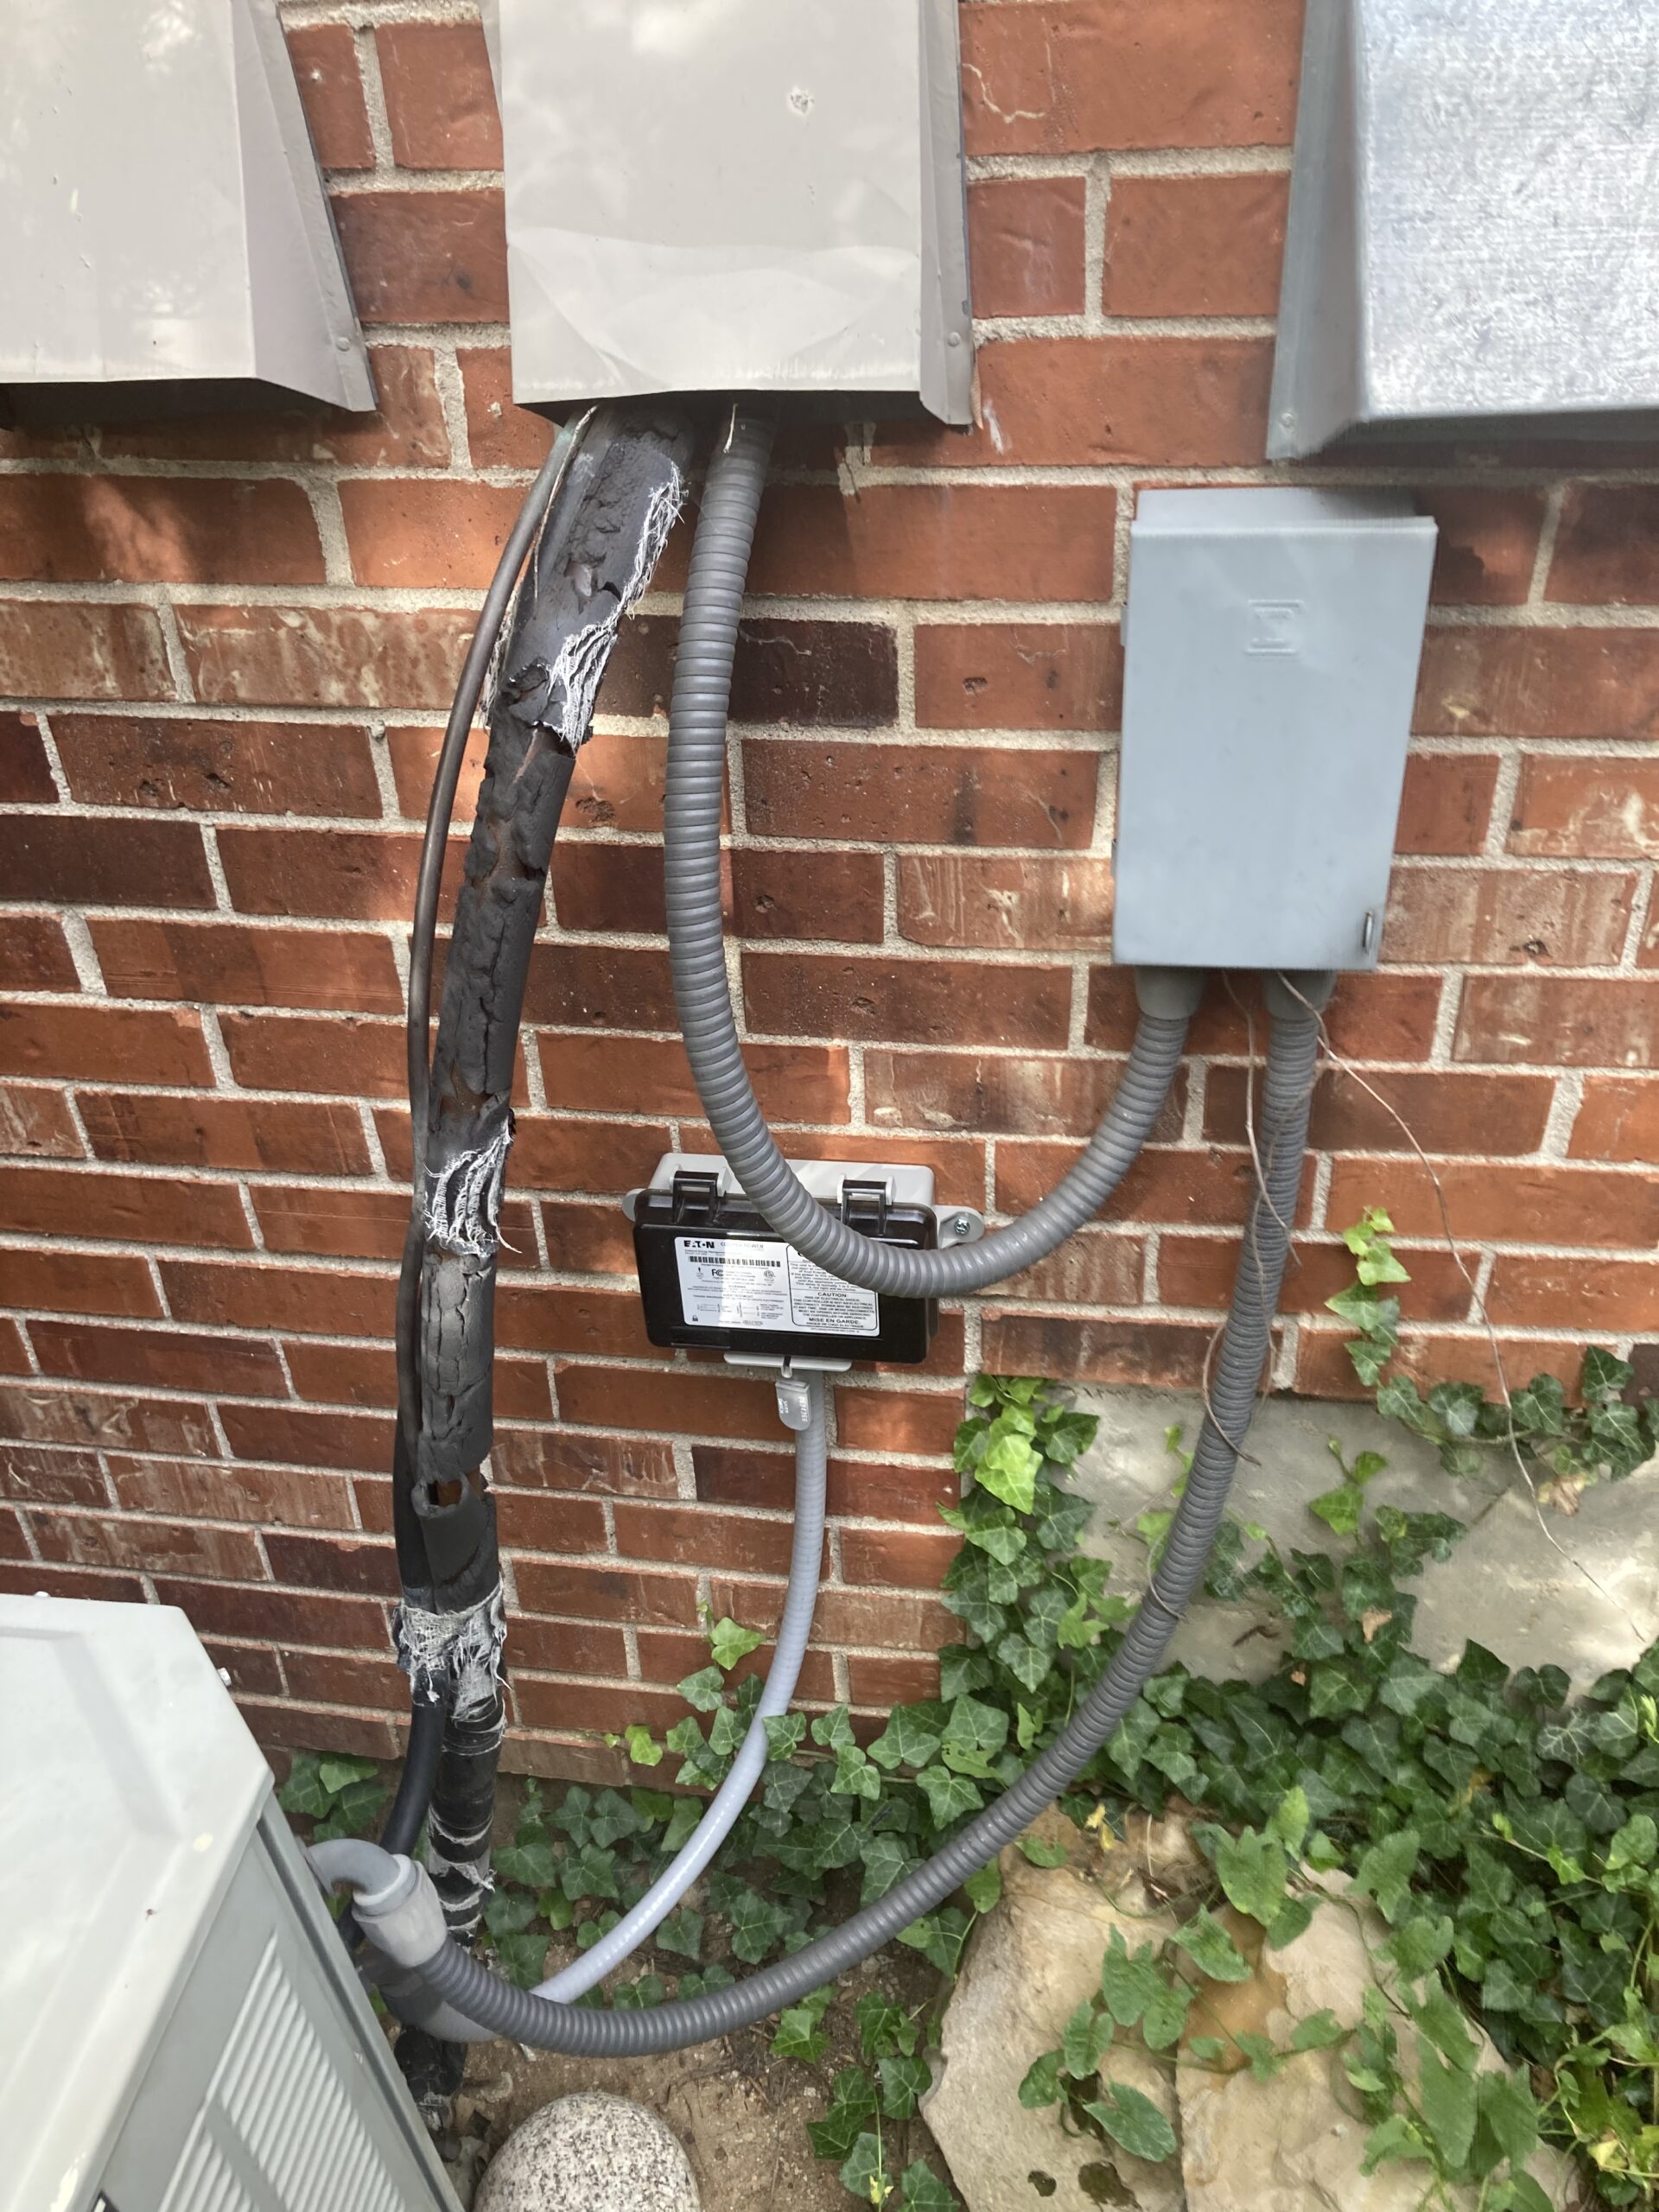 An electrical panel that needs to be repaired outside a home